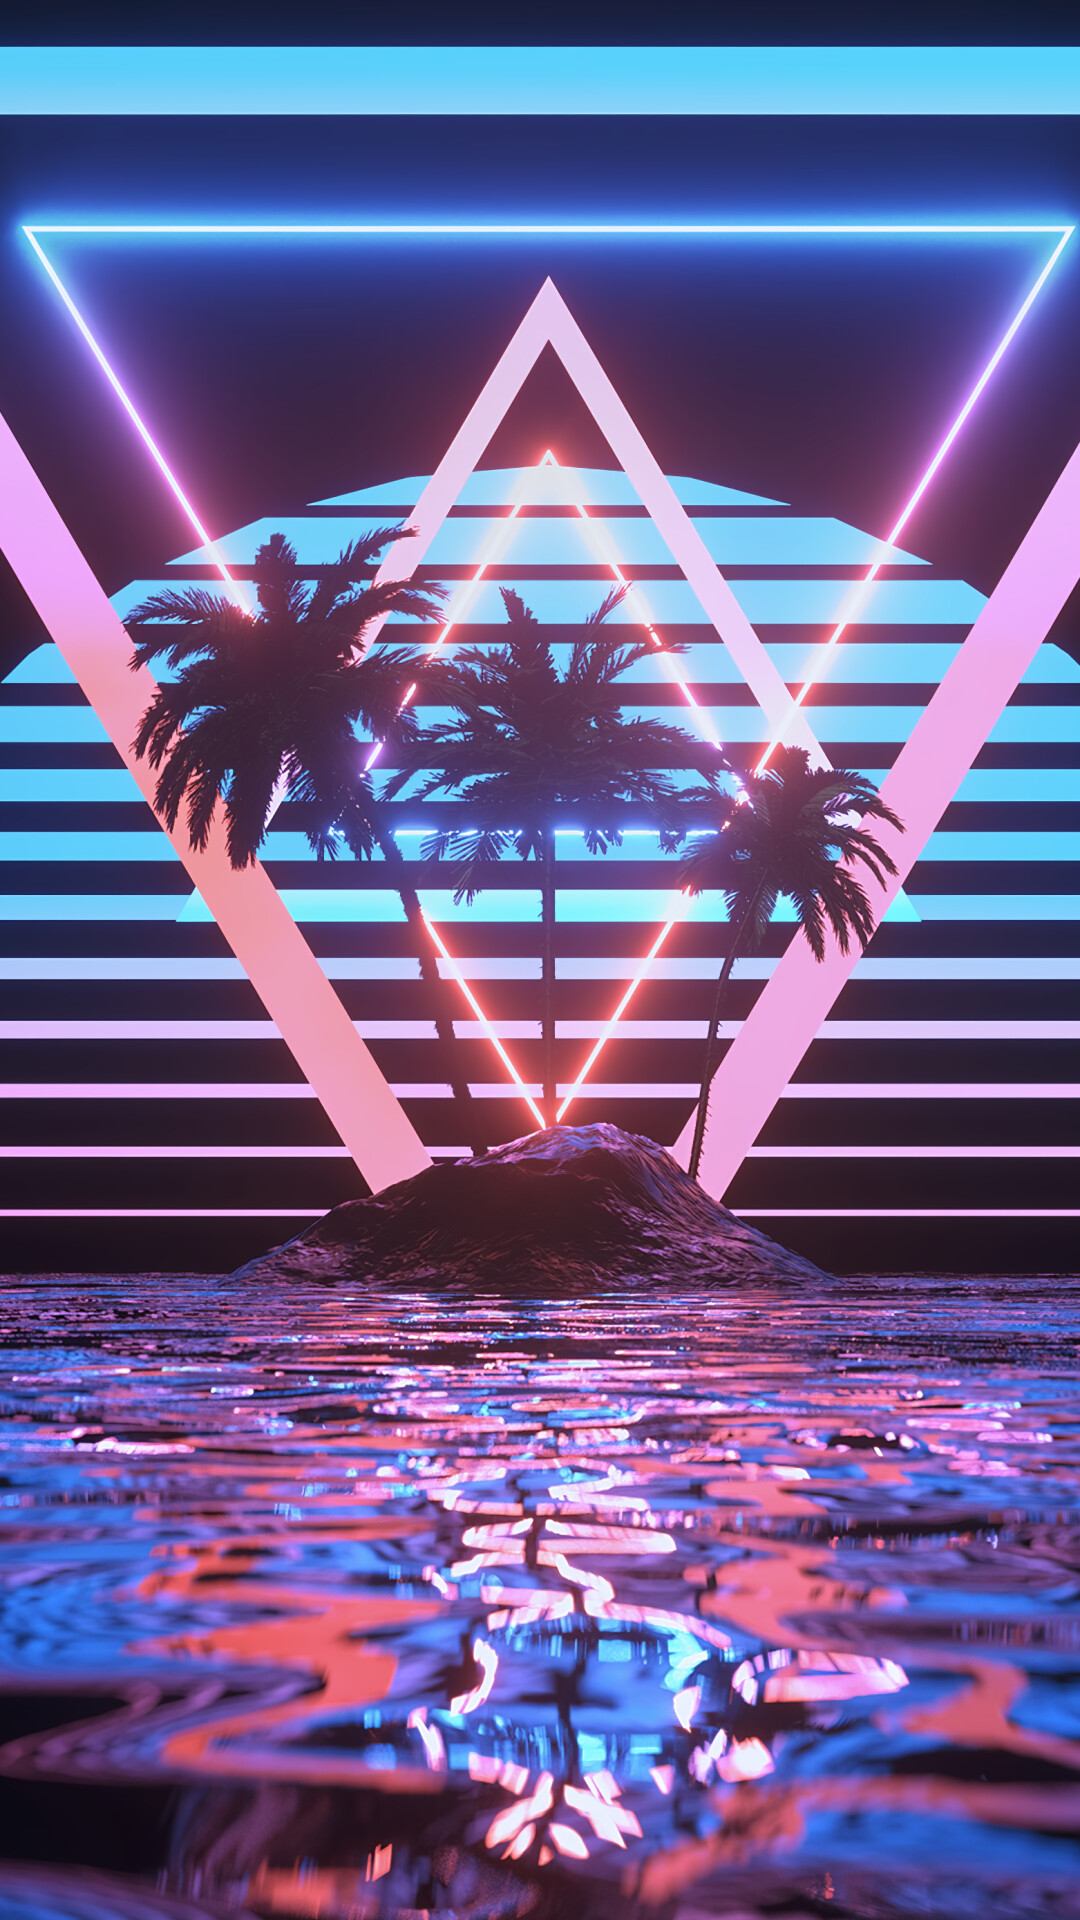 Triangle: Synthwave, Retrowave, Neon lights, Palms, Parallel lines. 1080x1920 Full HD Wallpaper.